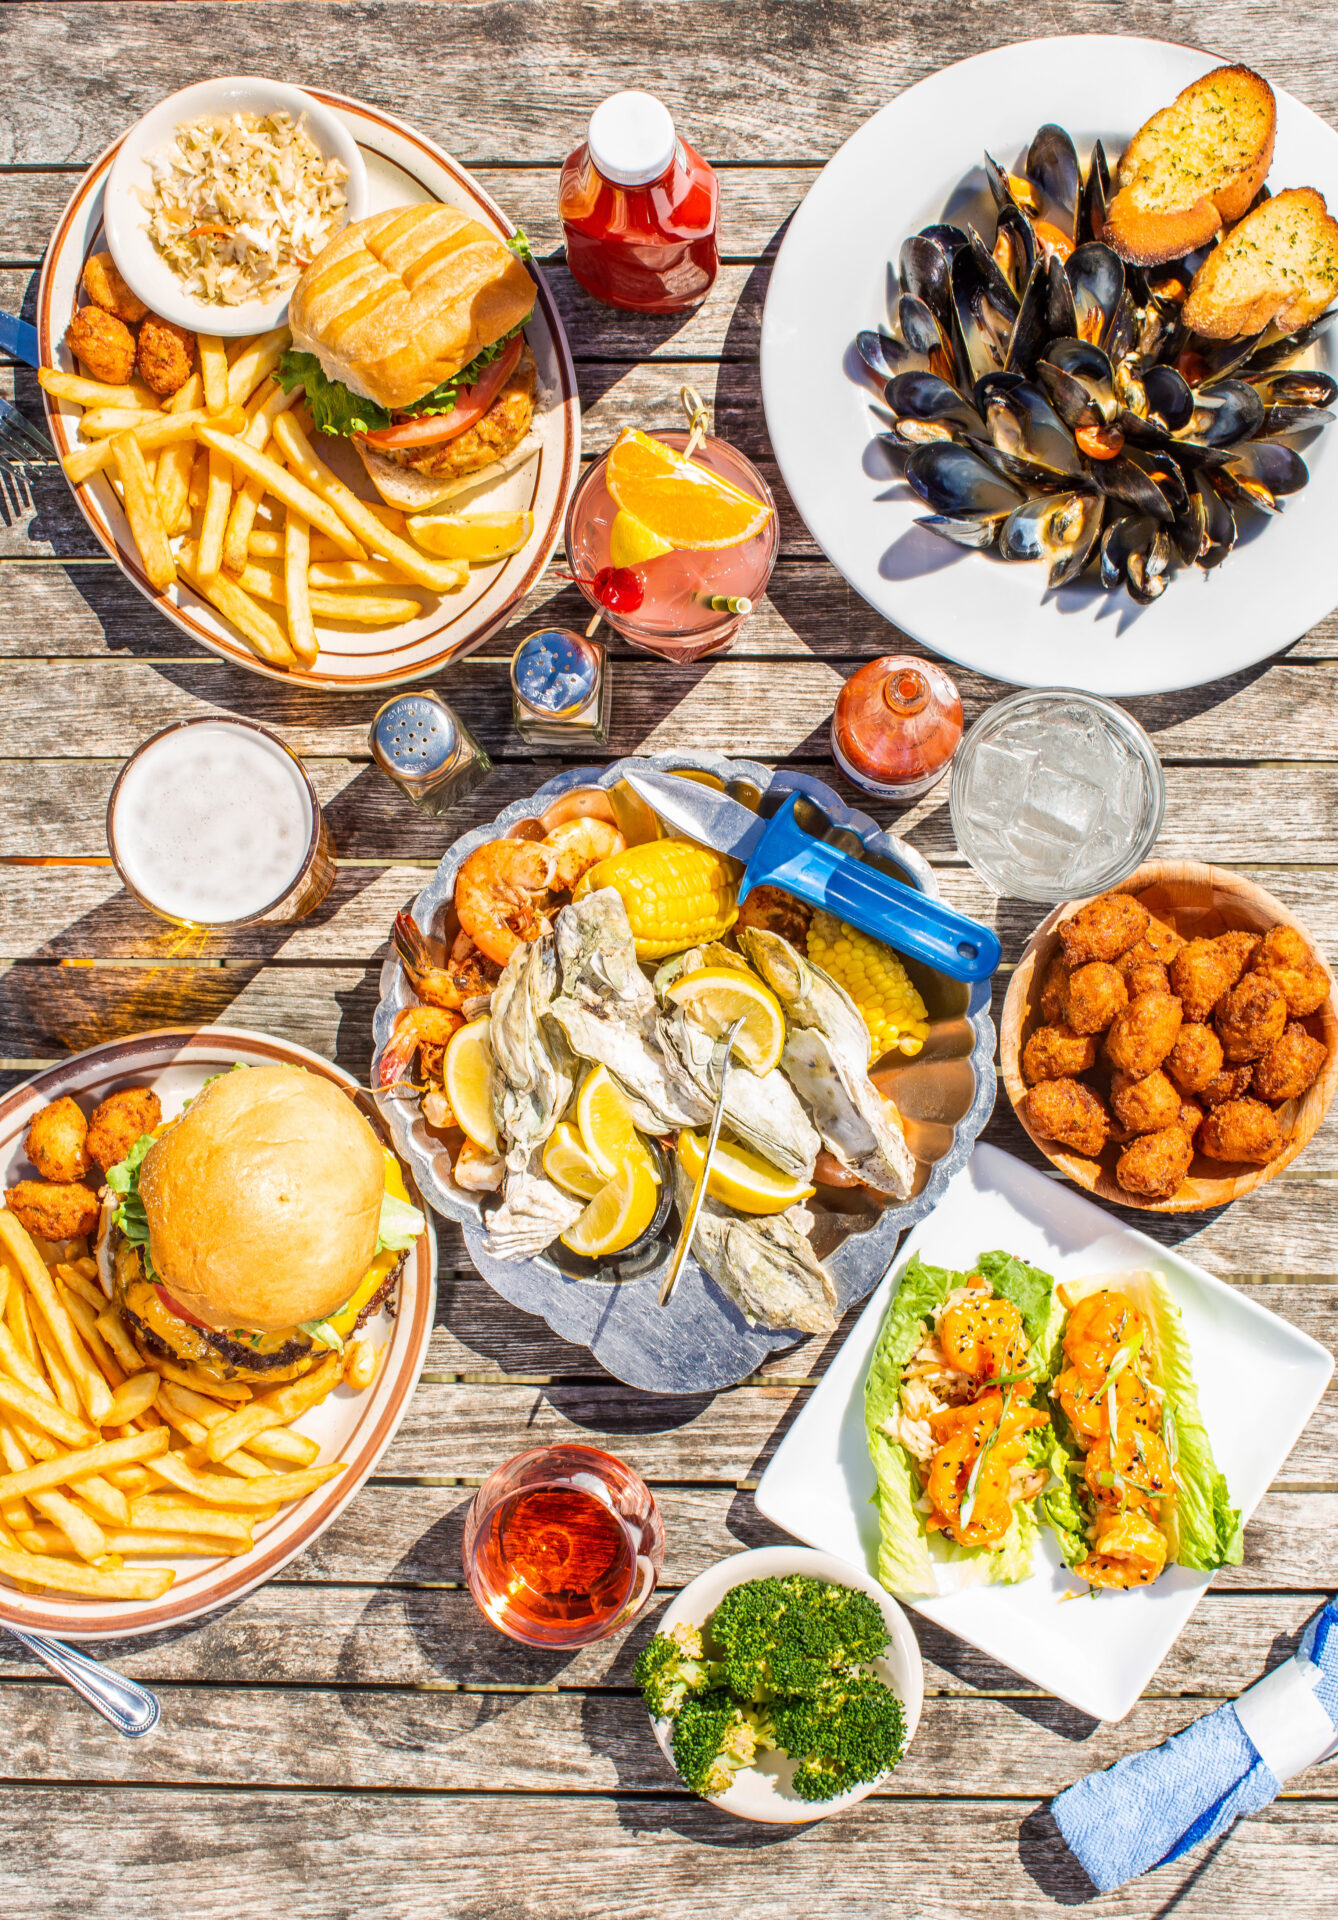 Table spread with seafood, burgers, and fries